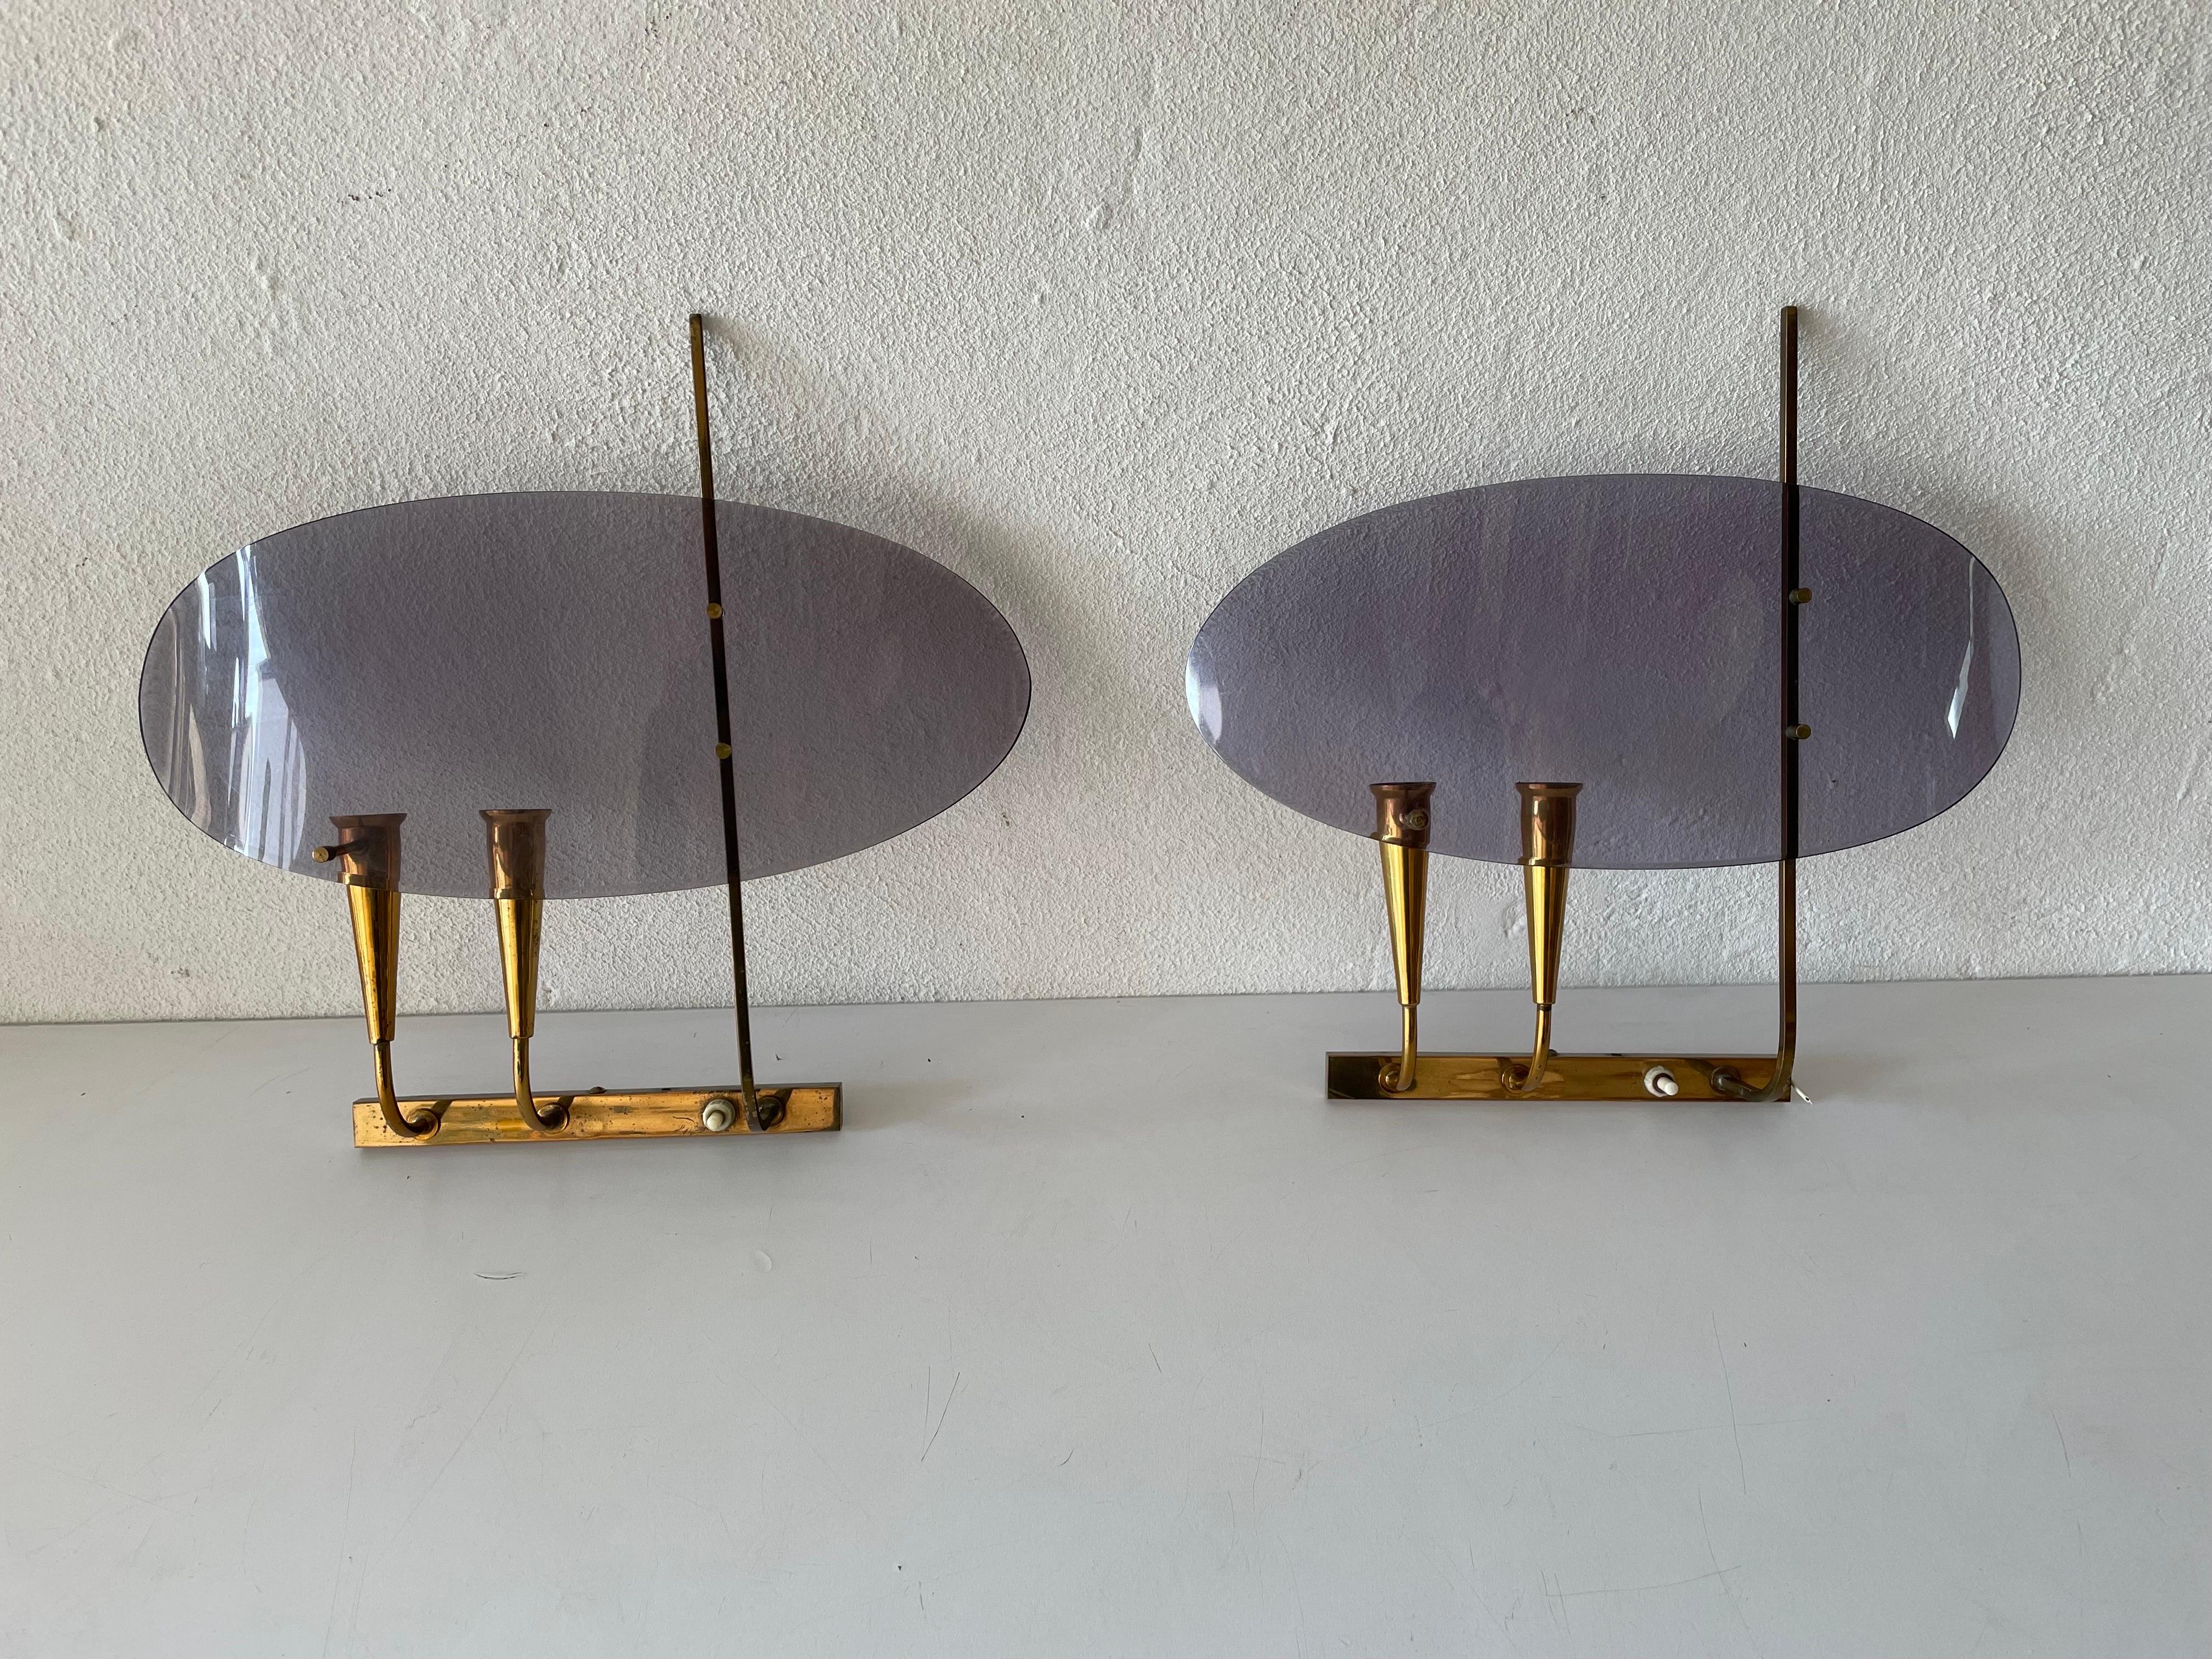 Italian Rare Purple Lucite and Brass Pair of Sconces by Stilux Milano, 1950s, Italy

Very elegant and Minimalist wall lamps.
Lamp is in very good condition.

These lamps works with E14 standard light bulbs. 
Wired and suitable to use in all